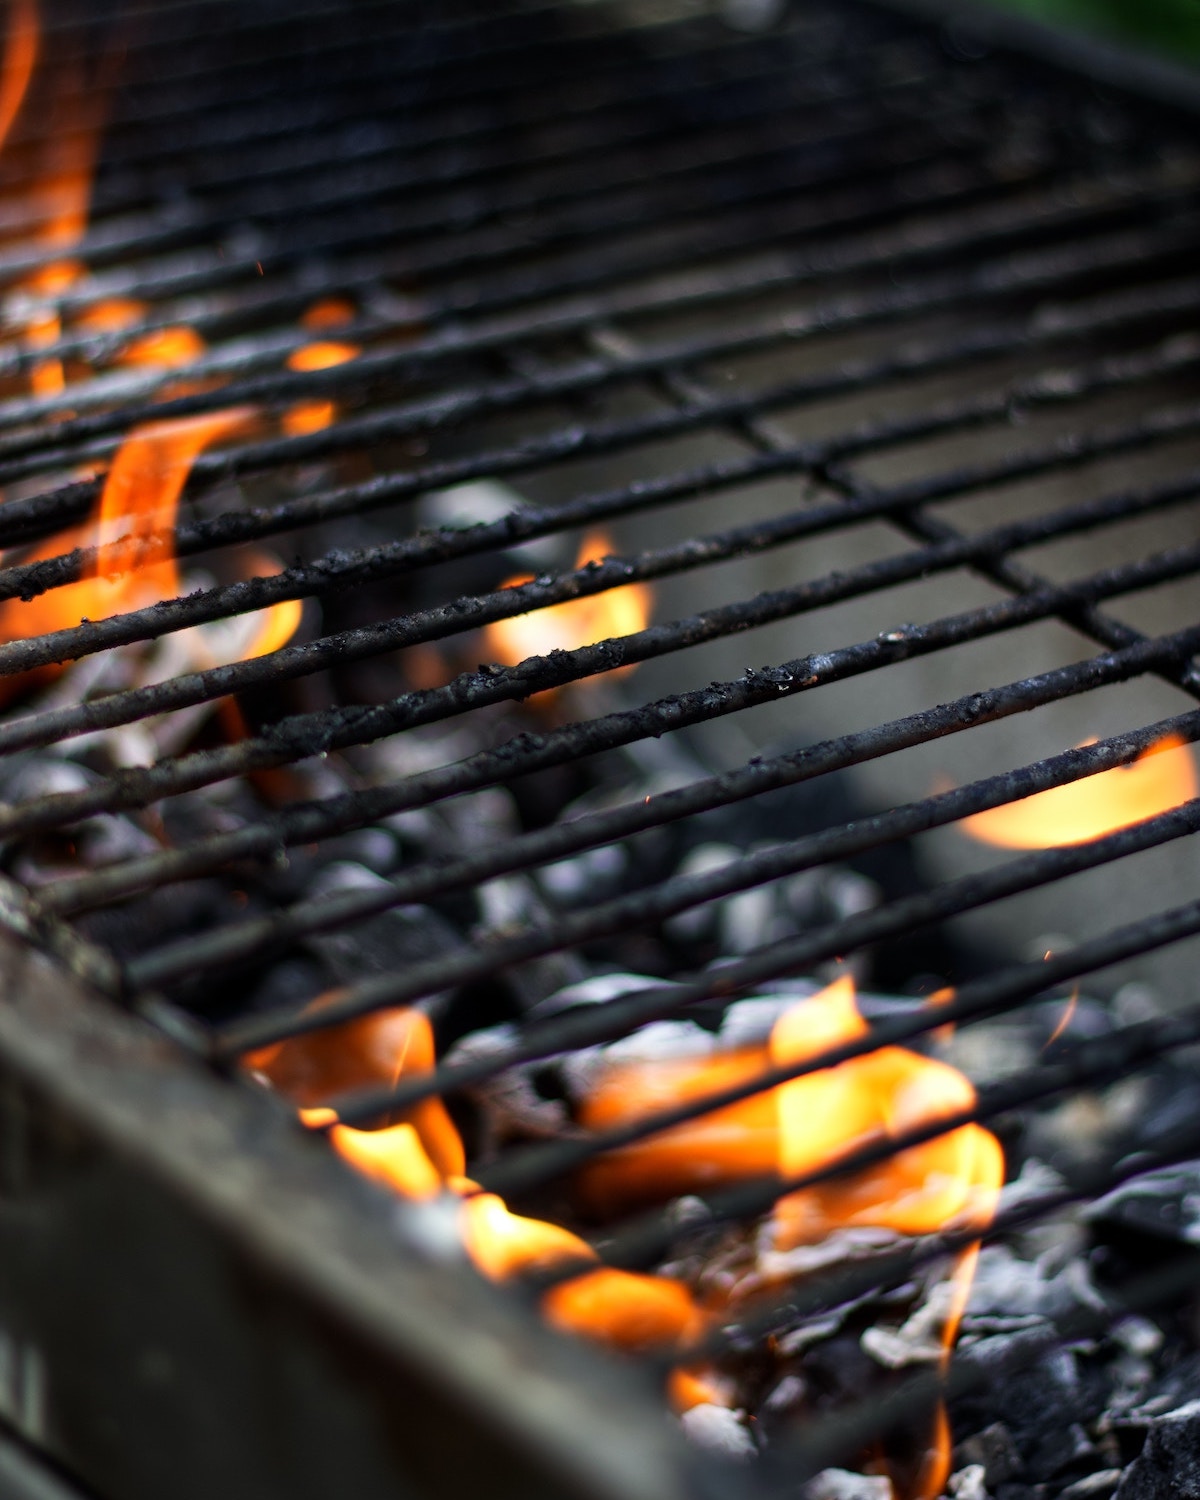 How to clean stainless steel grill racks